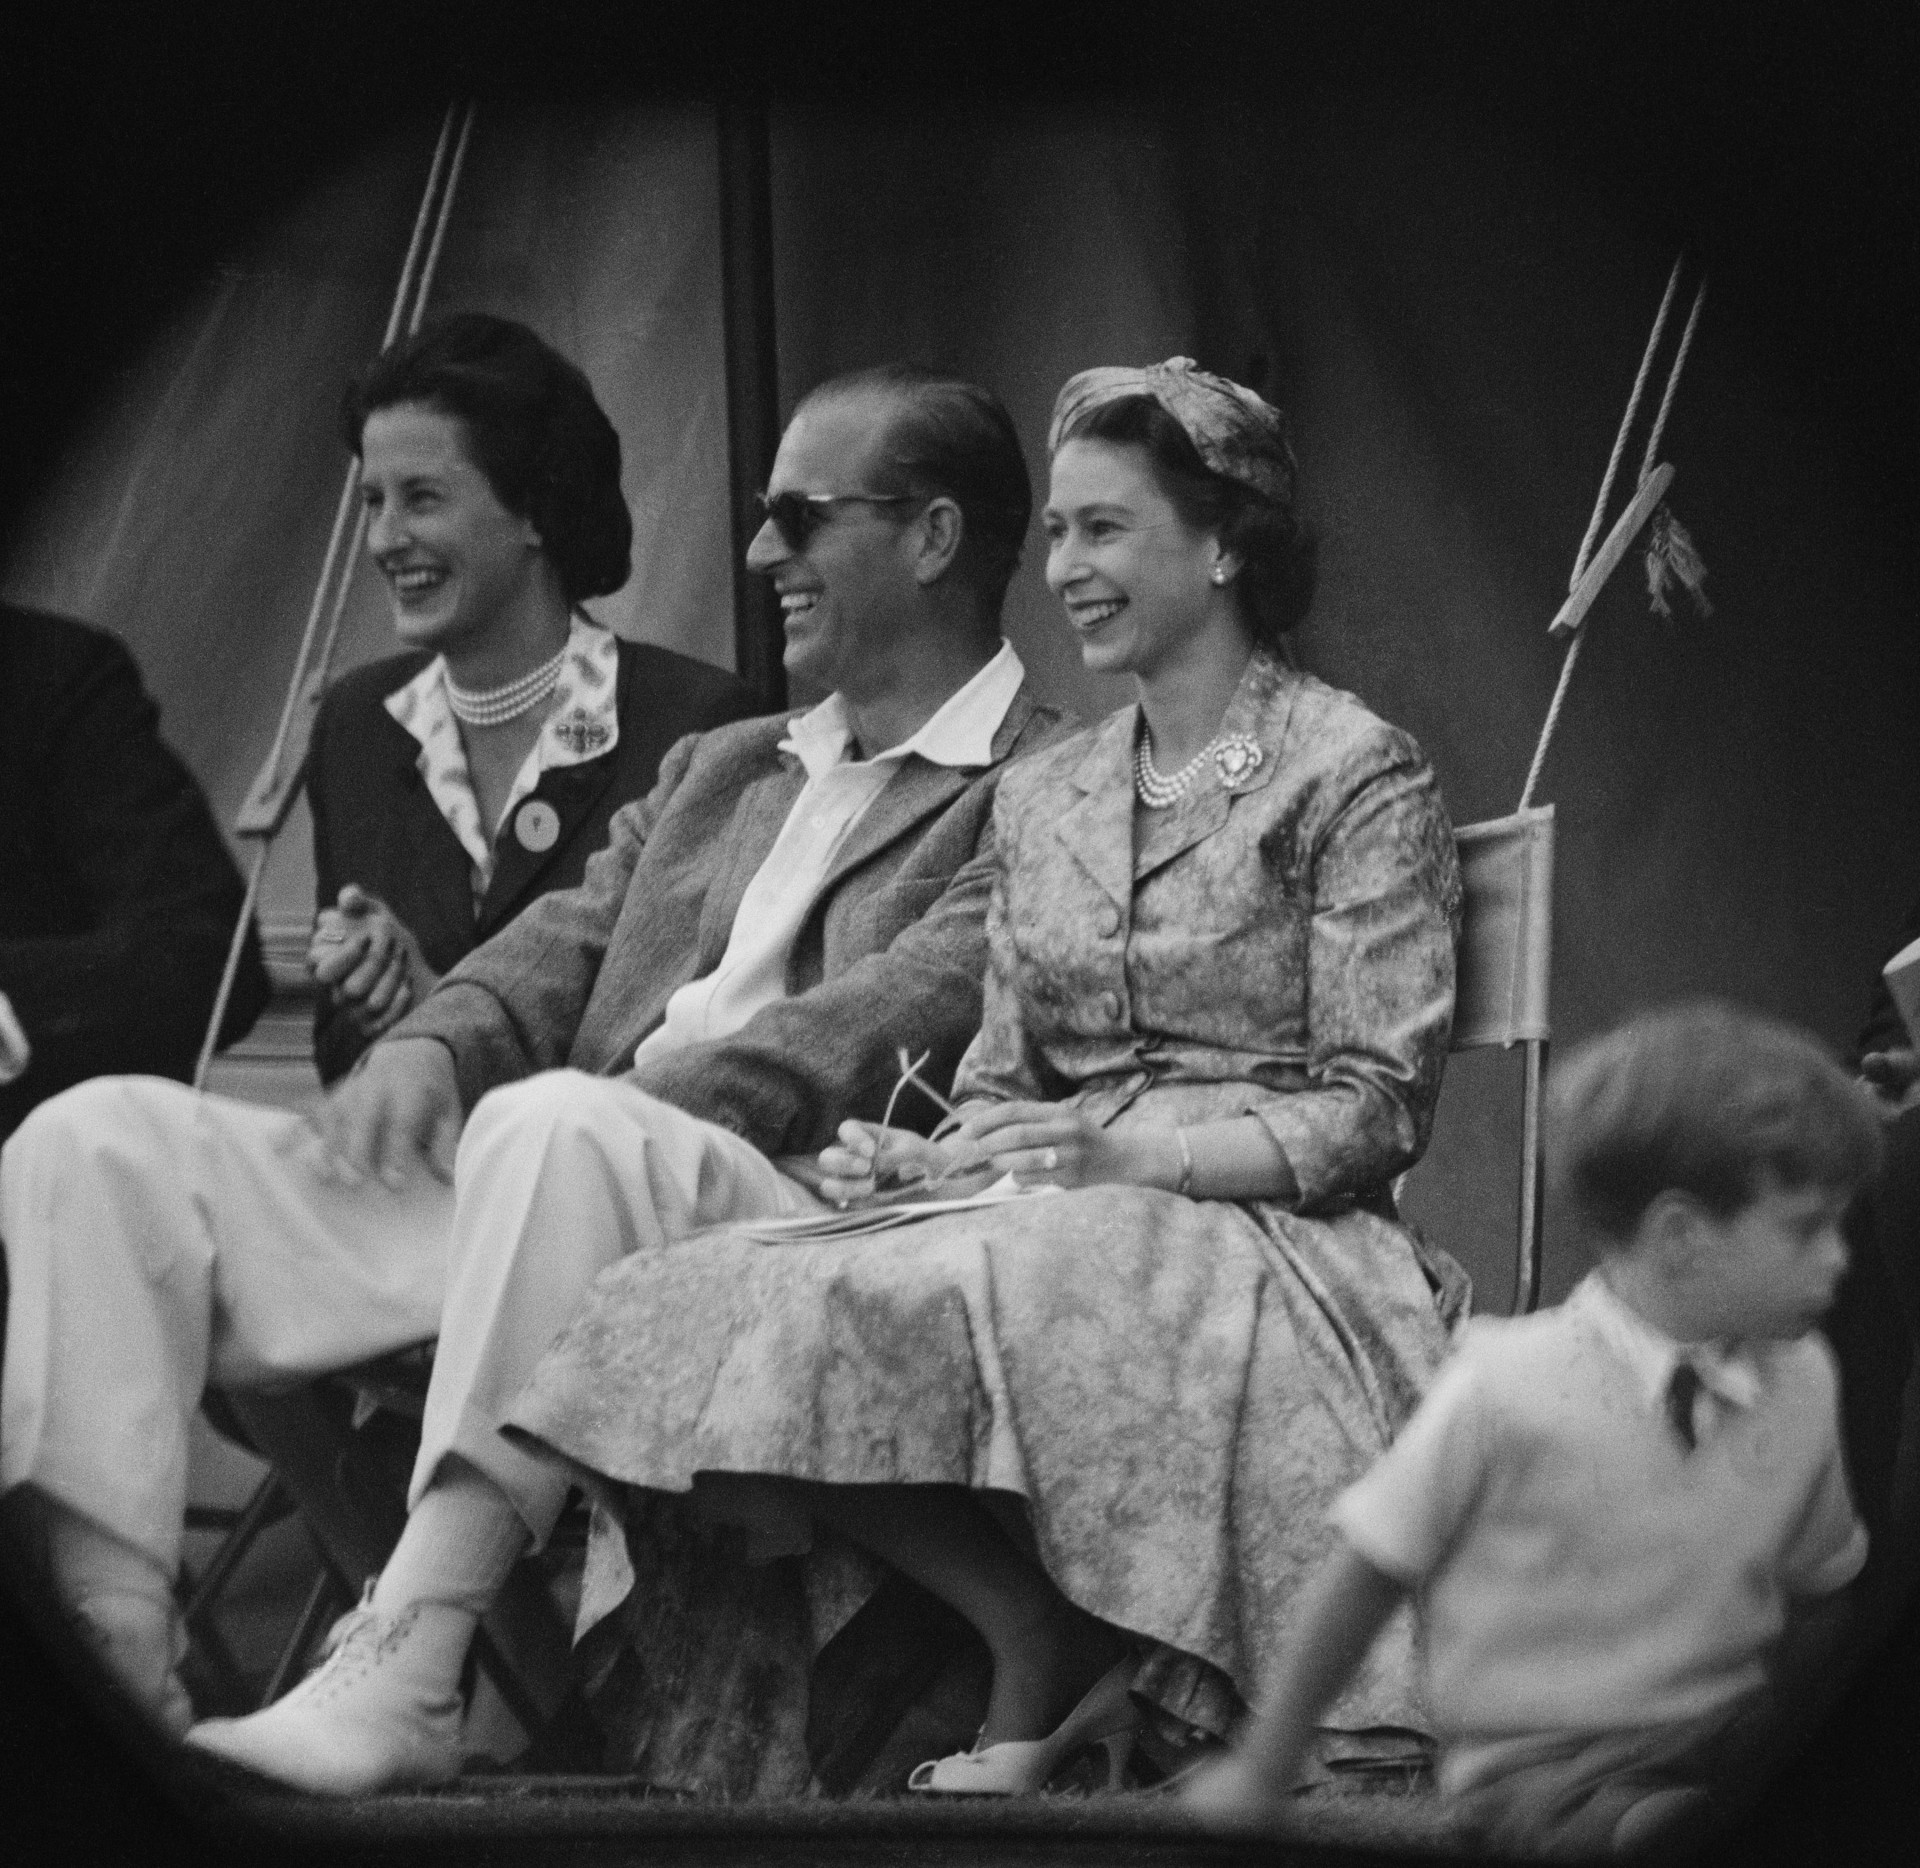 Queen Elizabeth II and Prince Philip, Duke of Edinburgh watch a cricket match at Highclere Castle. <p>You may also like:<a href="https://www.starsinsider.com/n/378447?utm_source=msn.com&utm_medium=display&utm_campaign=referral_description&utm_content=705778en-za"> The biggest engineering mistakes of all time</a></p>